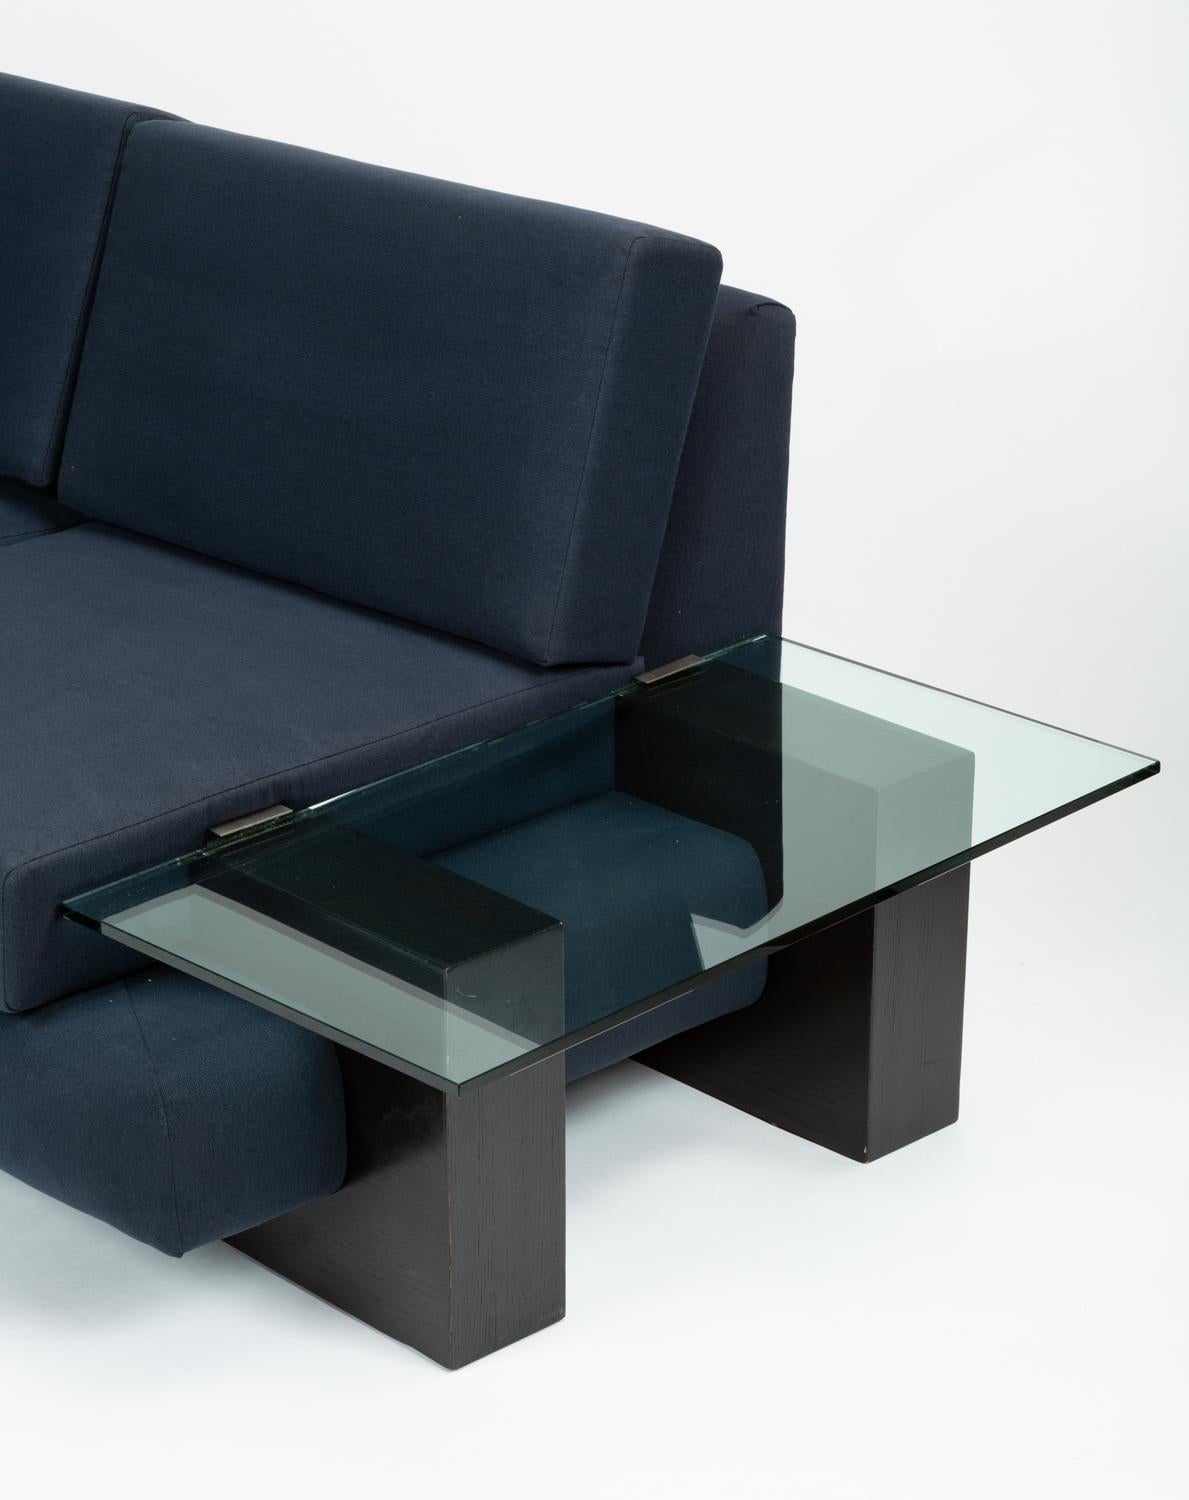 Late 20th Century American-Made Sofa with Glass End Tables by Kroehler